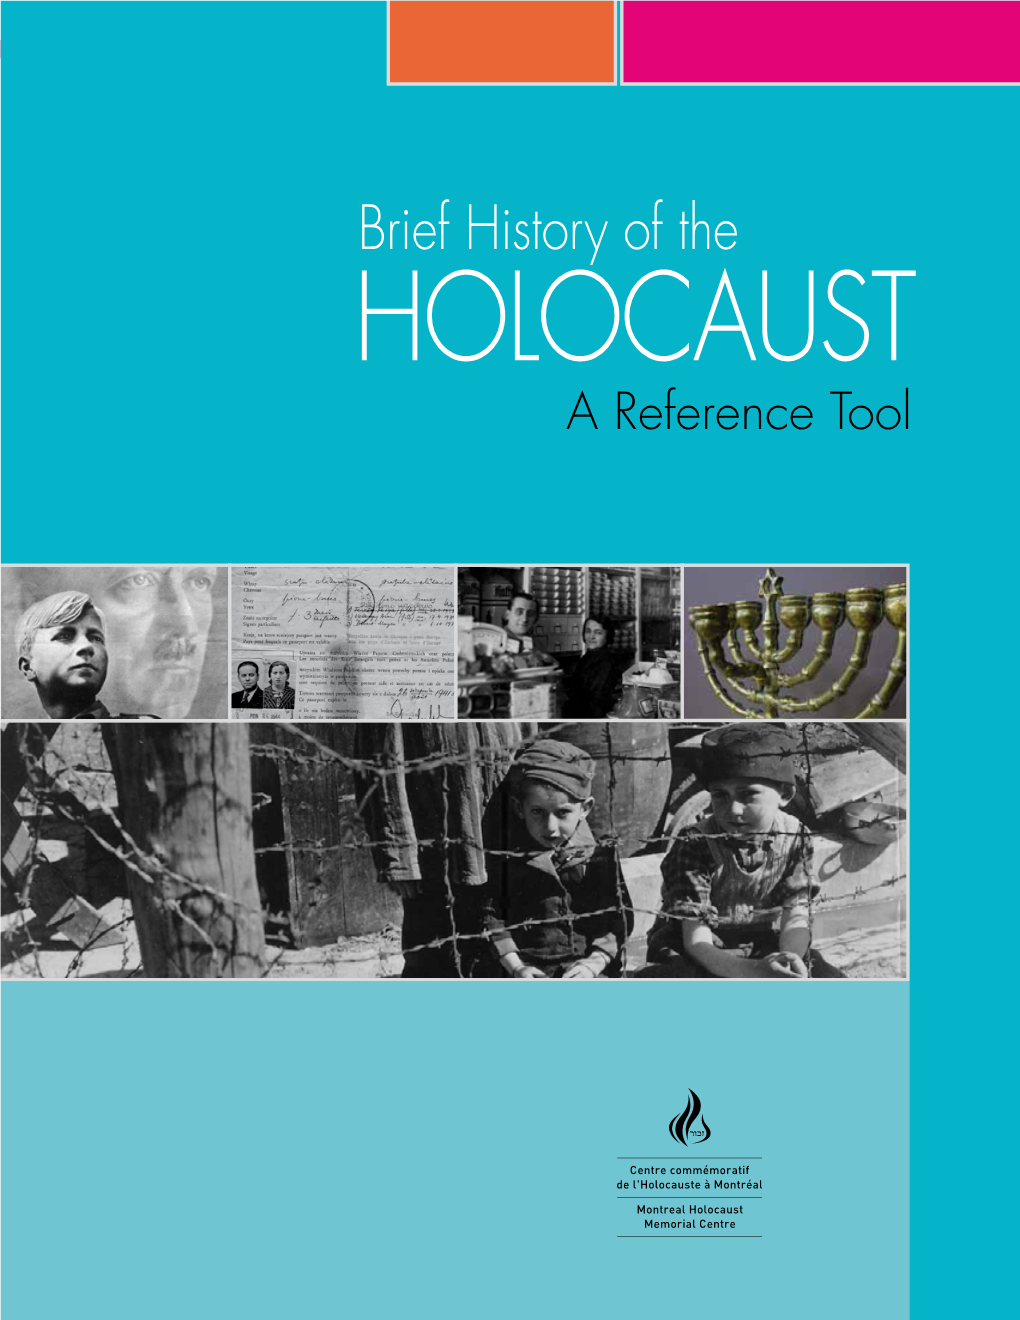 Brief History of the Holocaust, a Reference Tool, Montreal